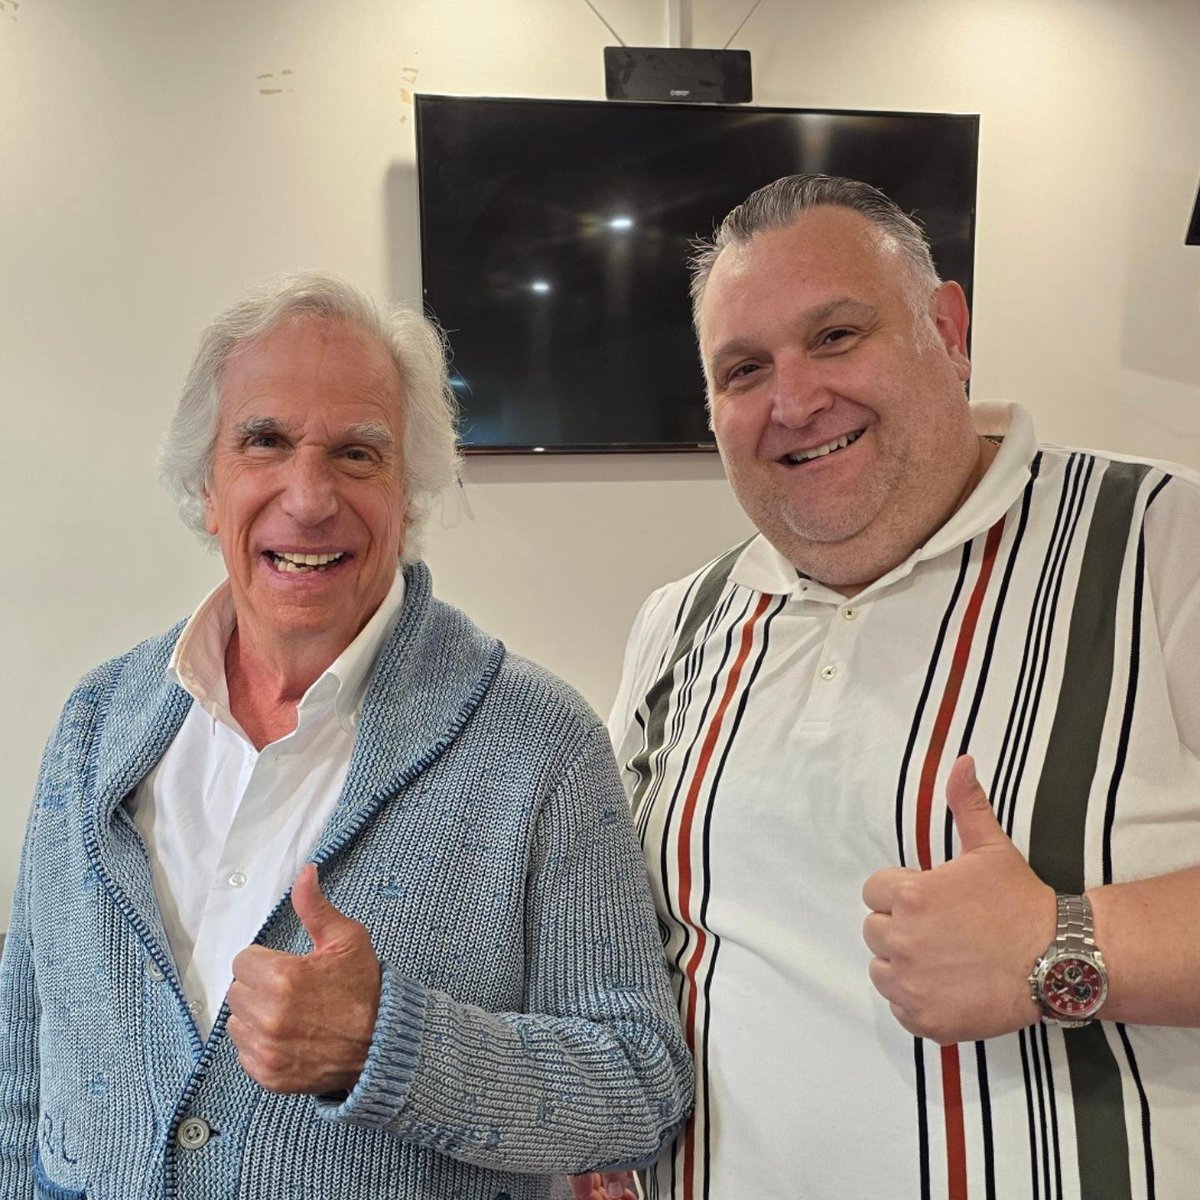 Can confirm that @hwinkler4real is genuinely one of the nicest blokes on the planet and his lovely wife Stacey is absolutely delightful.